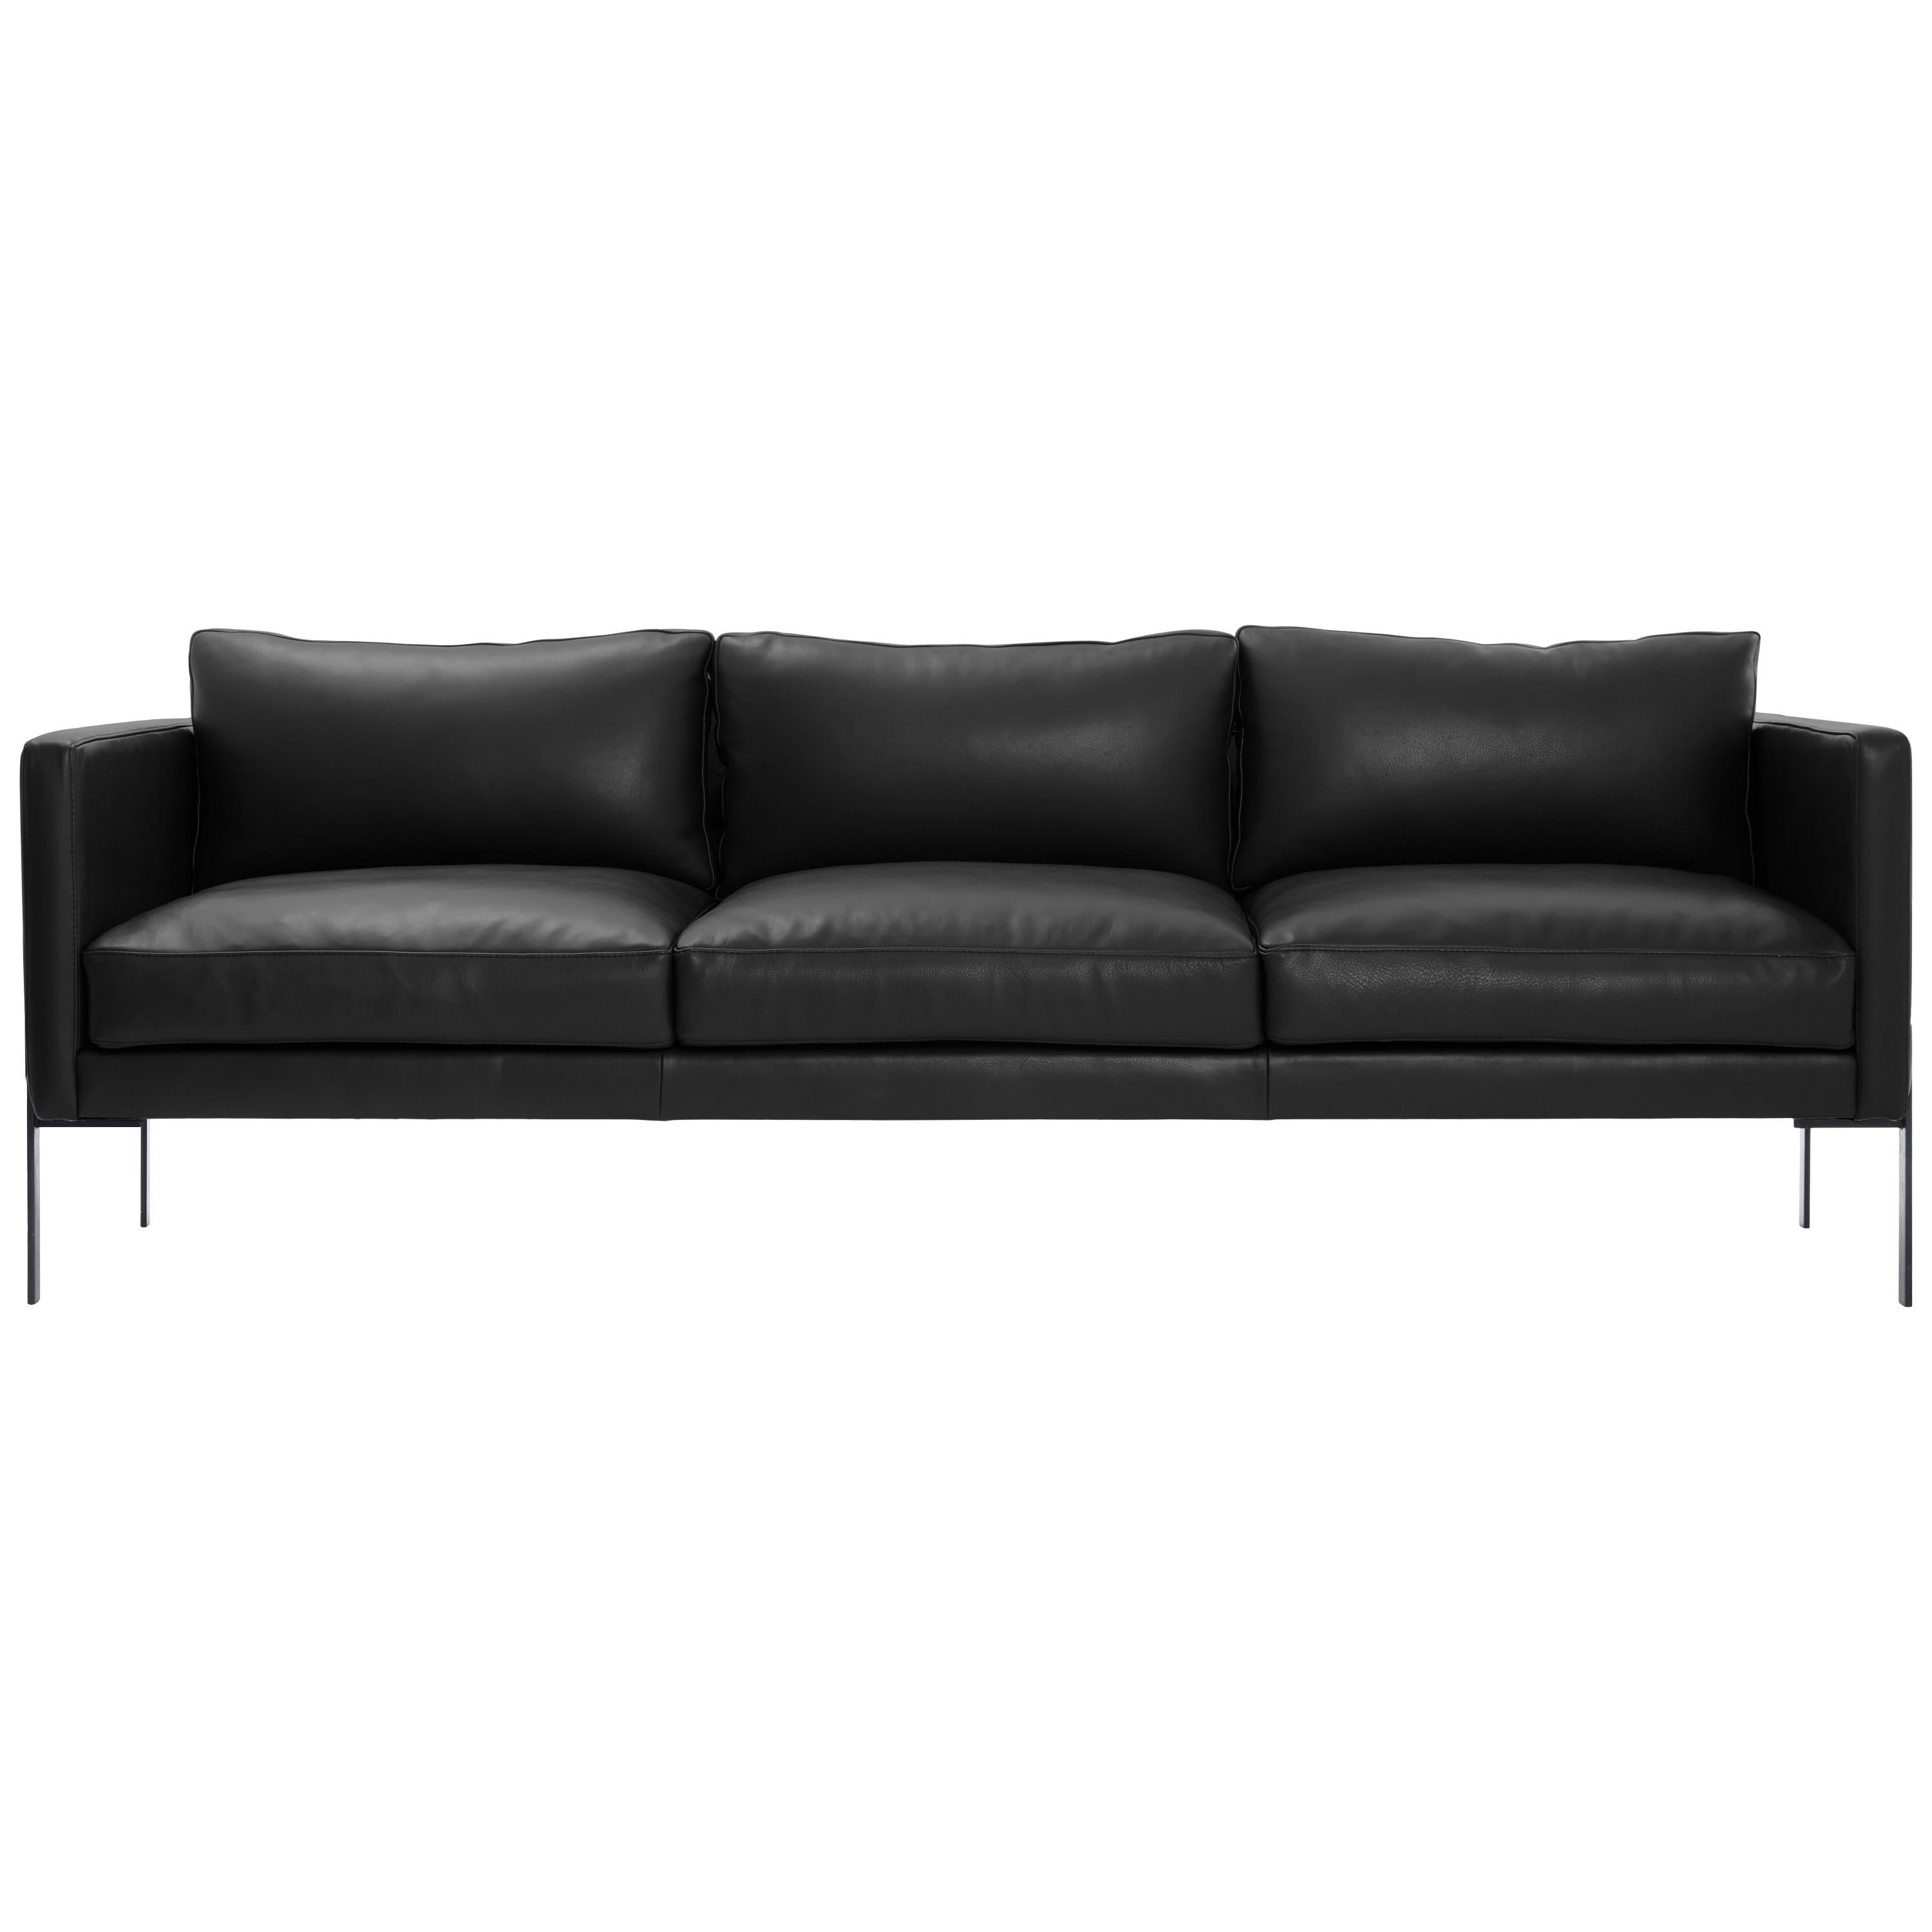 Truss Sofa in Liquorice Leather and Powder-Coated Steel by TRNK For Sale